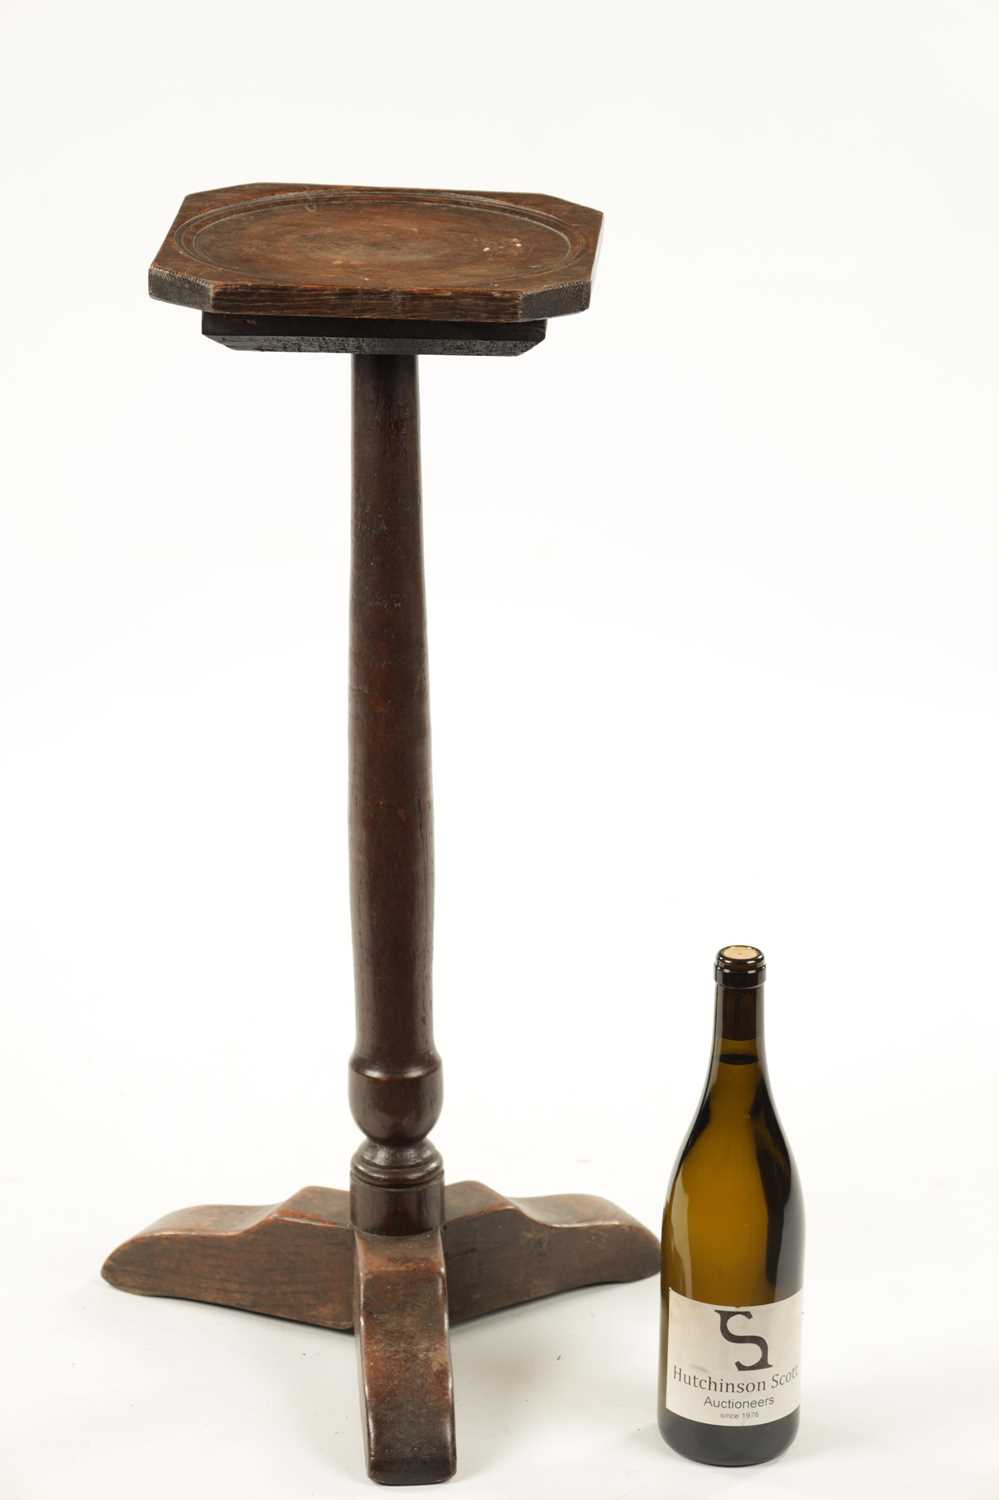 AN EARLY 18TH CENTURY OAK CANDLE STAND WITH DISHED TOP - Image 5 of 11